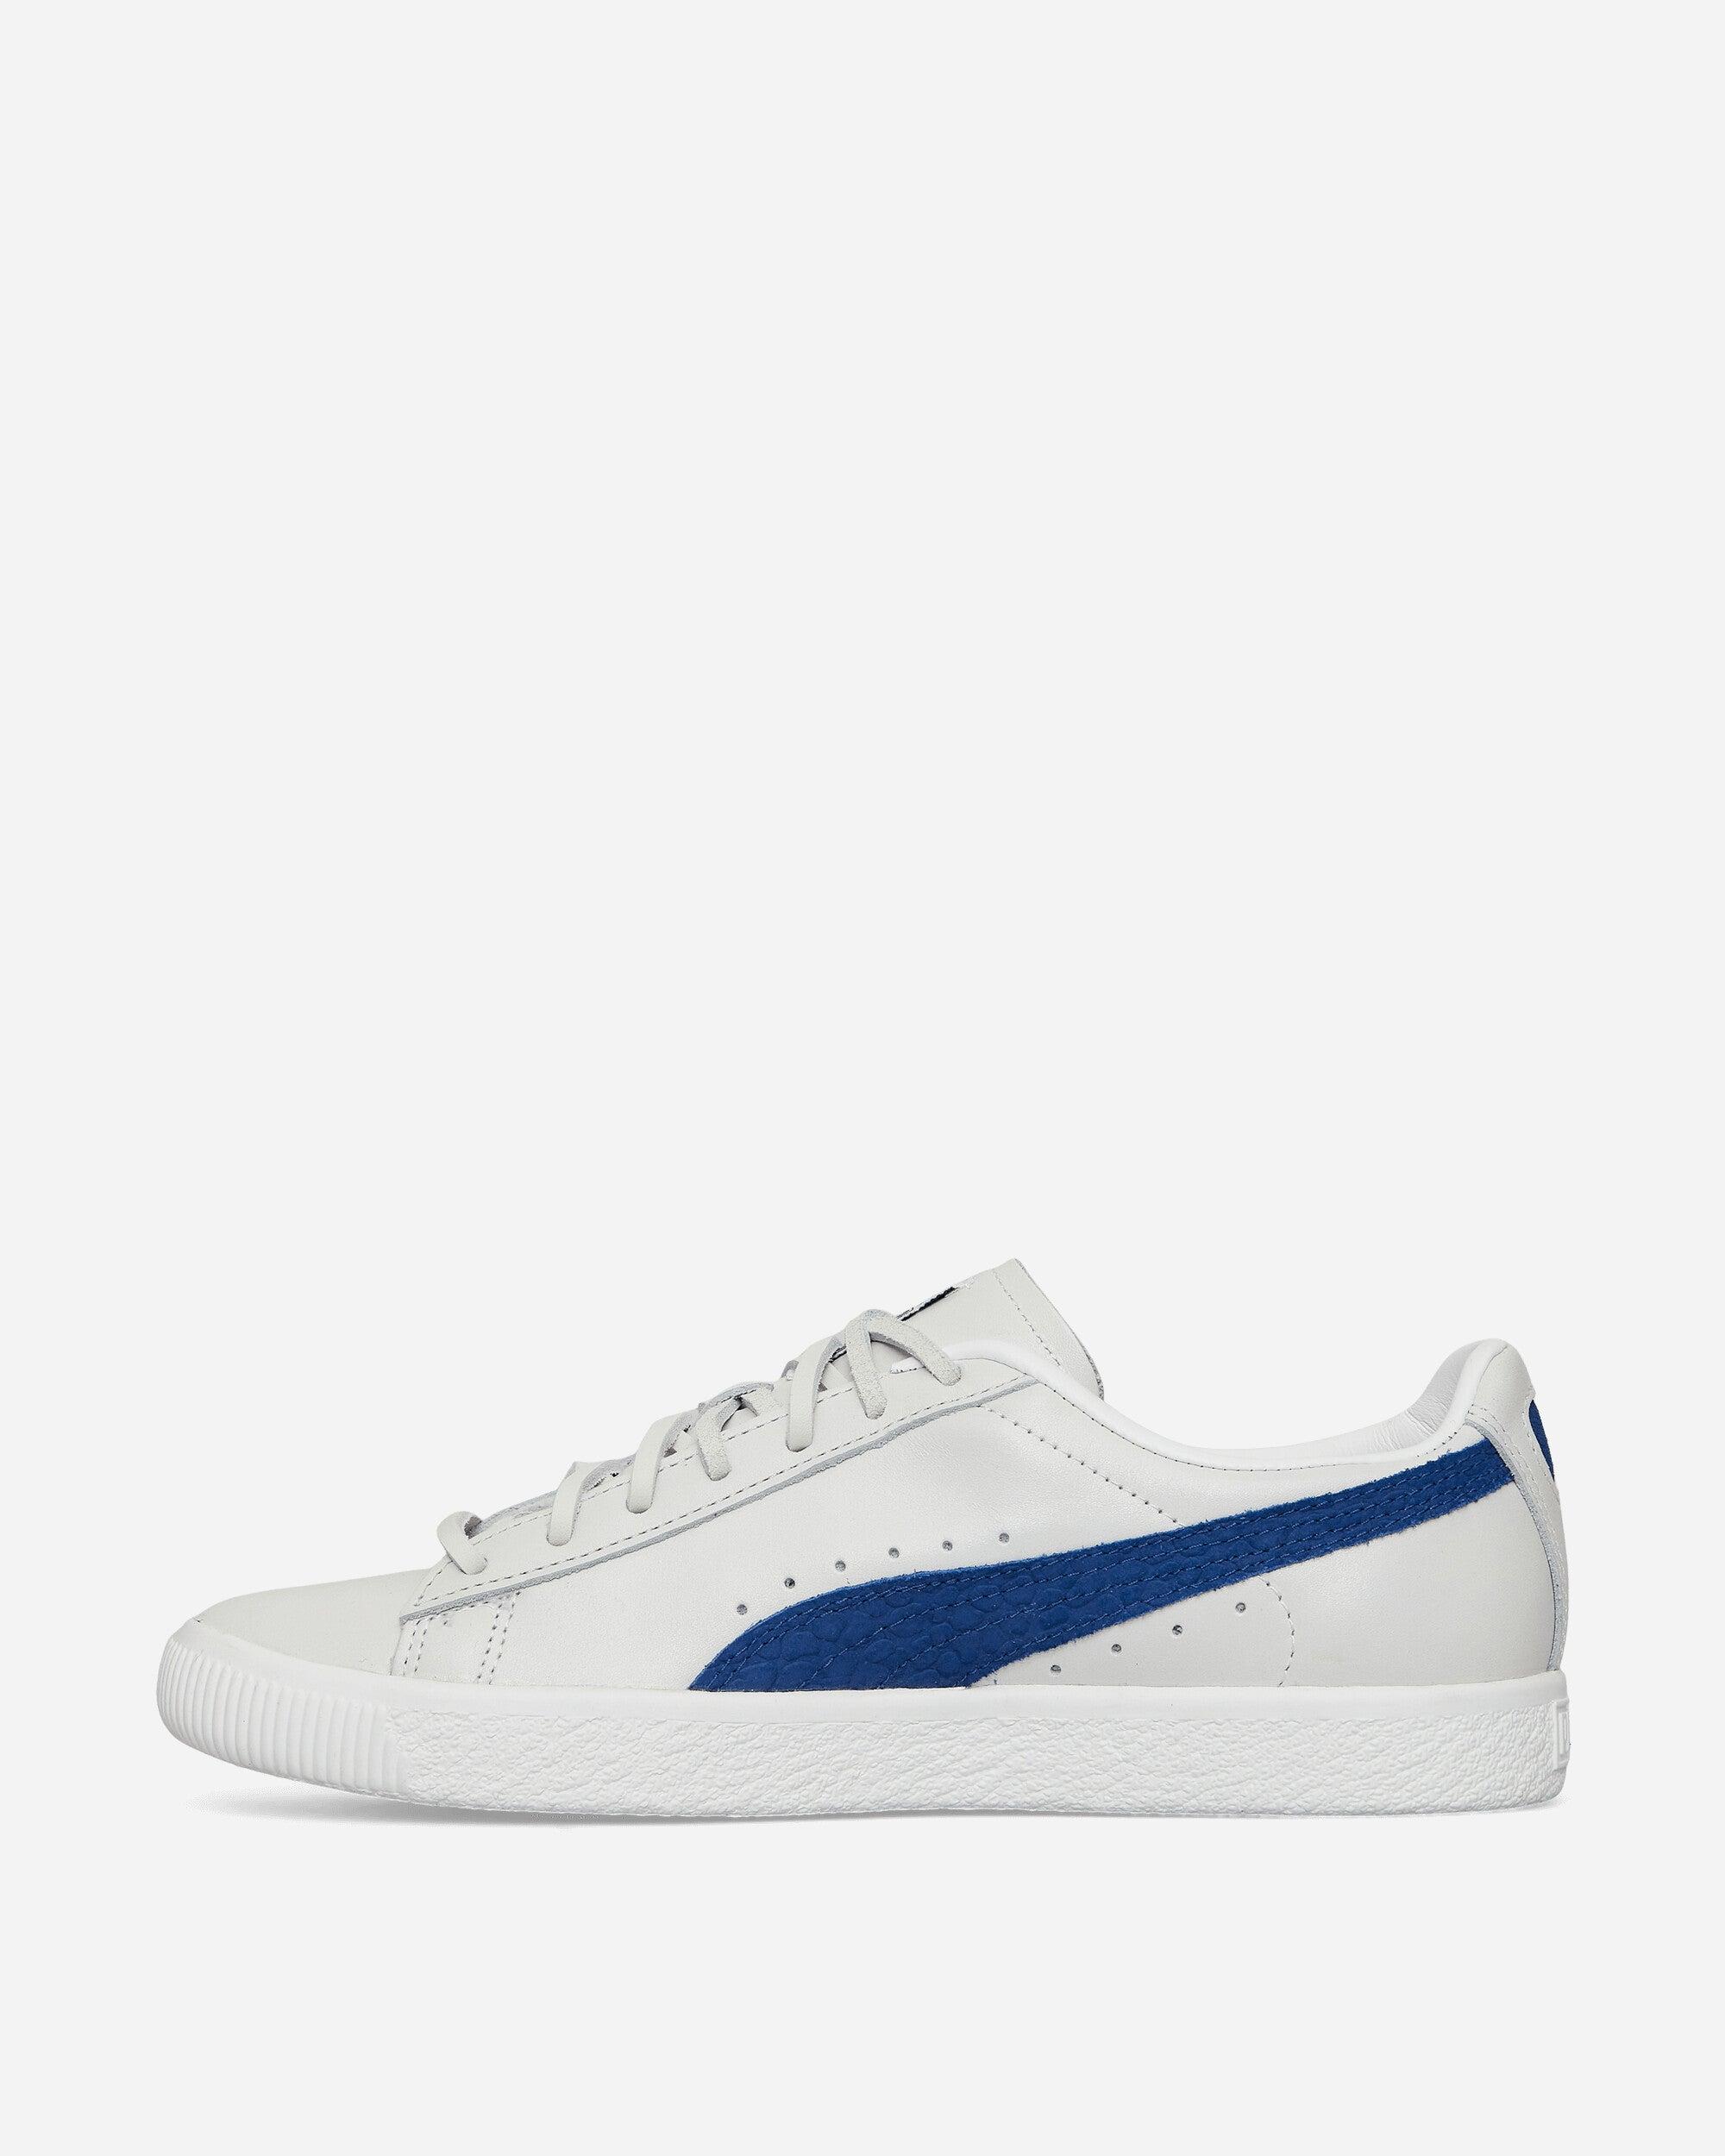 PUMA Clyde Soho Nyc Edition Sneakers White for Men | Lyst